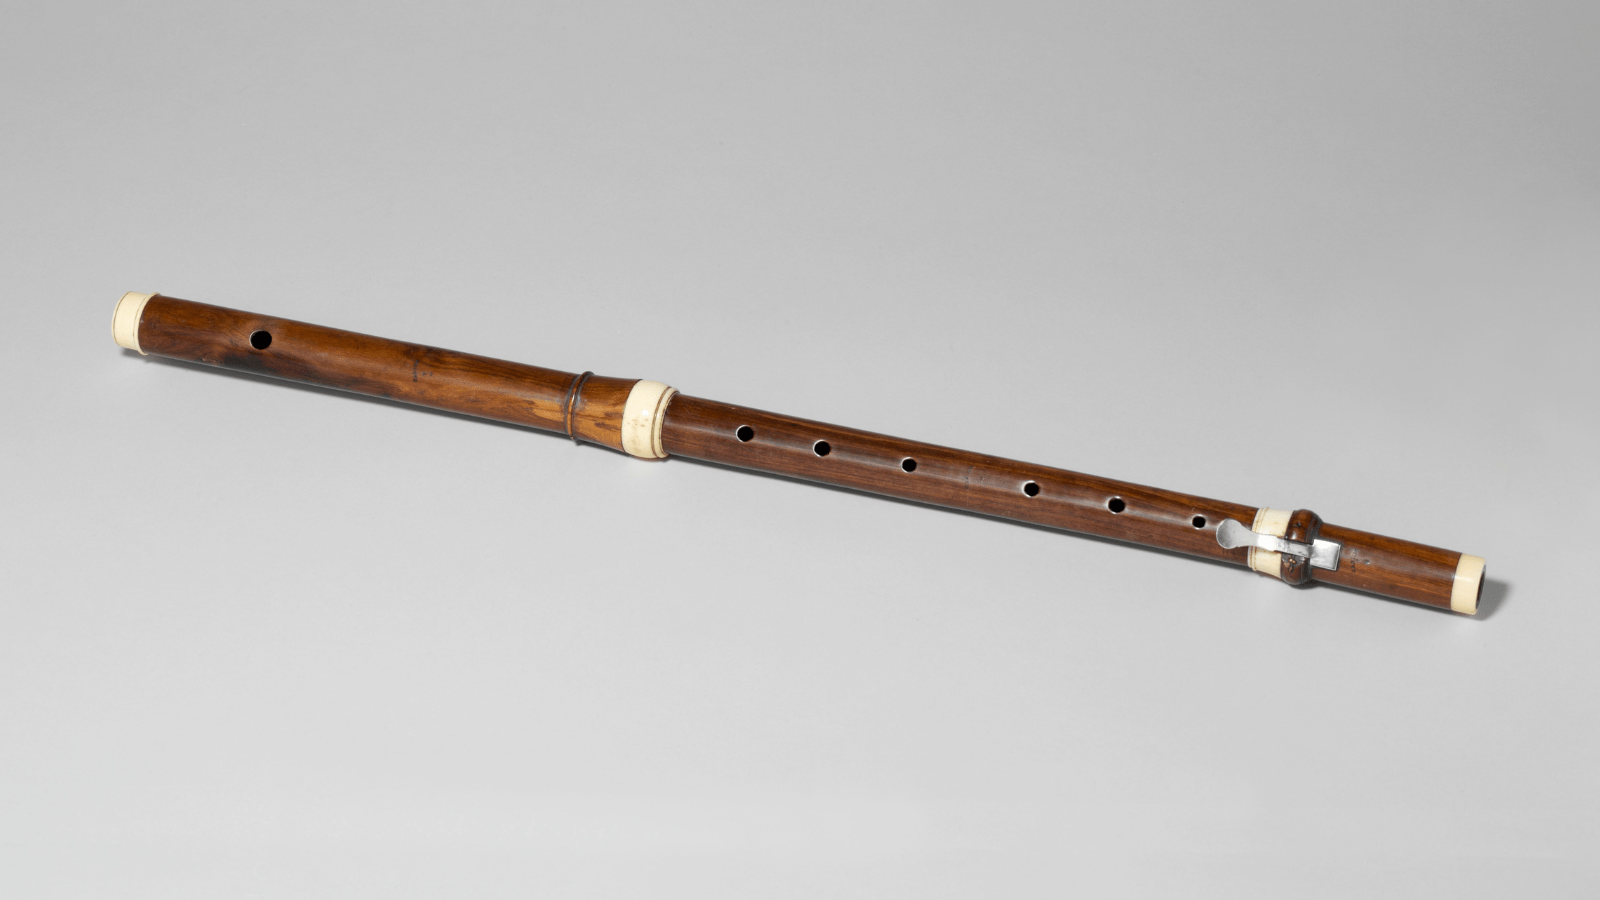 Picture of a wooden, transverse flute, estimated to be from the years 1720-1740. The flute is against a plain, light grey background. 